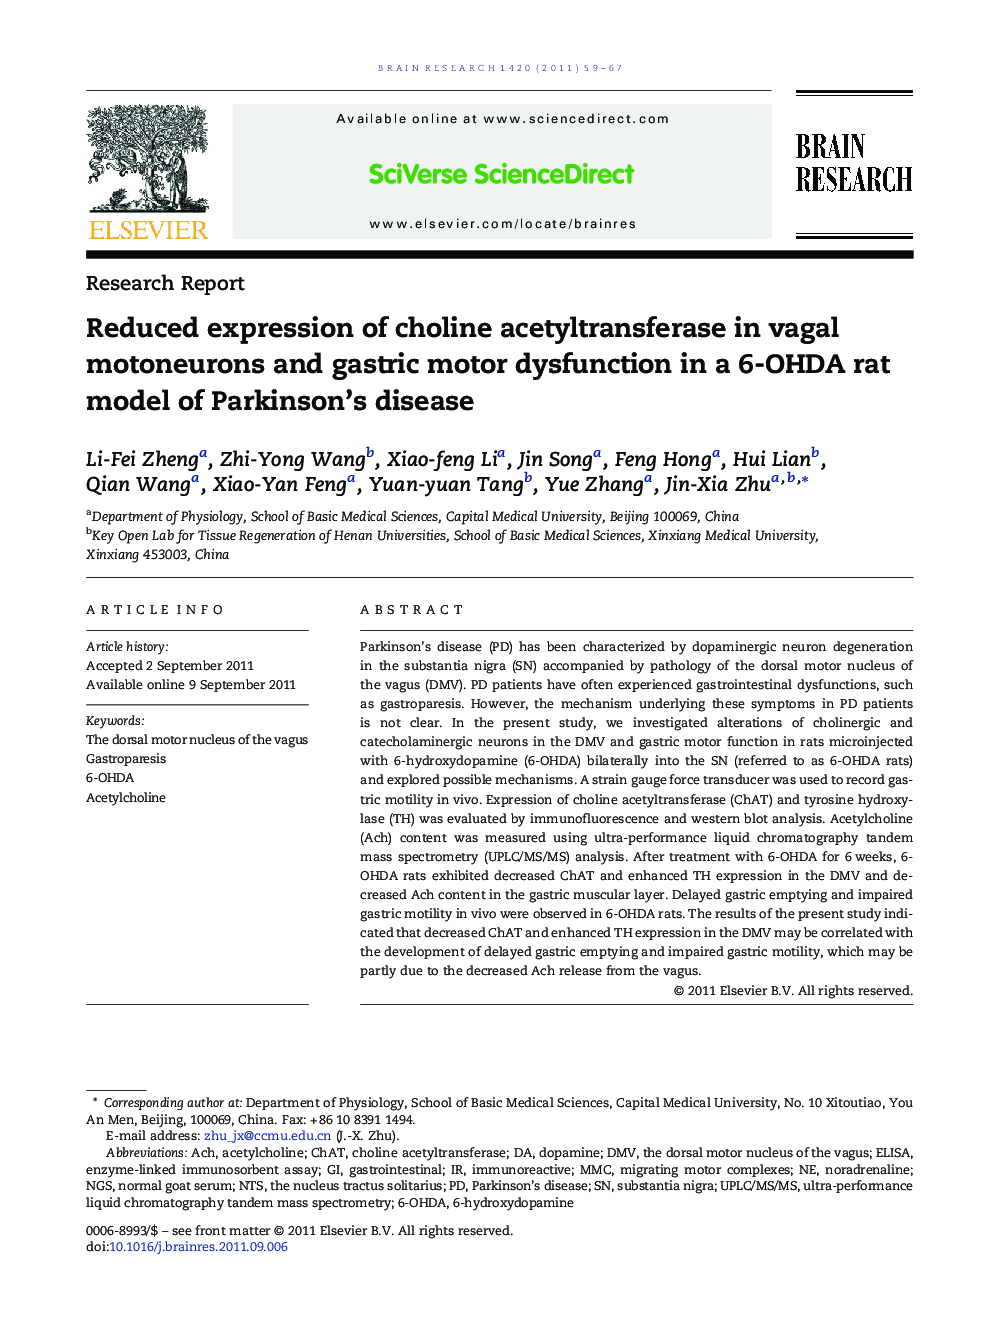 Reduced expression of choline acetyltransferase in vagal motoneurons and gastric motor dysfunction in a 6-OHDA rat model of Parkinson's disease